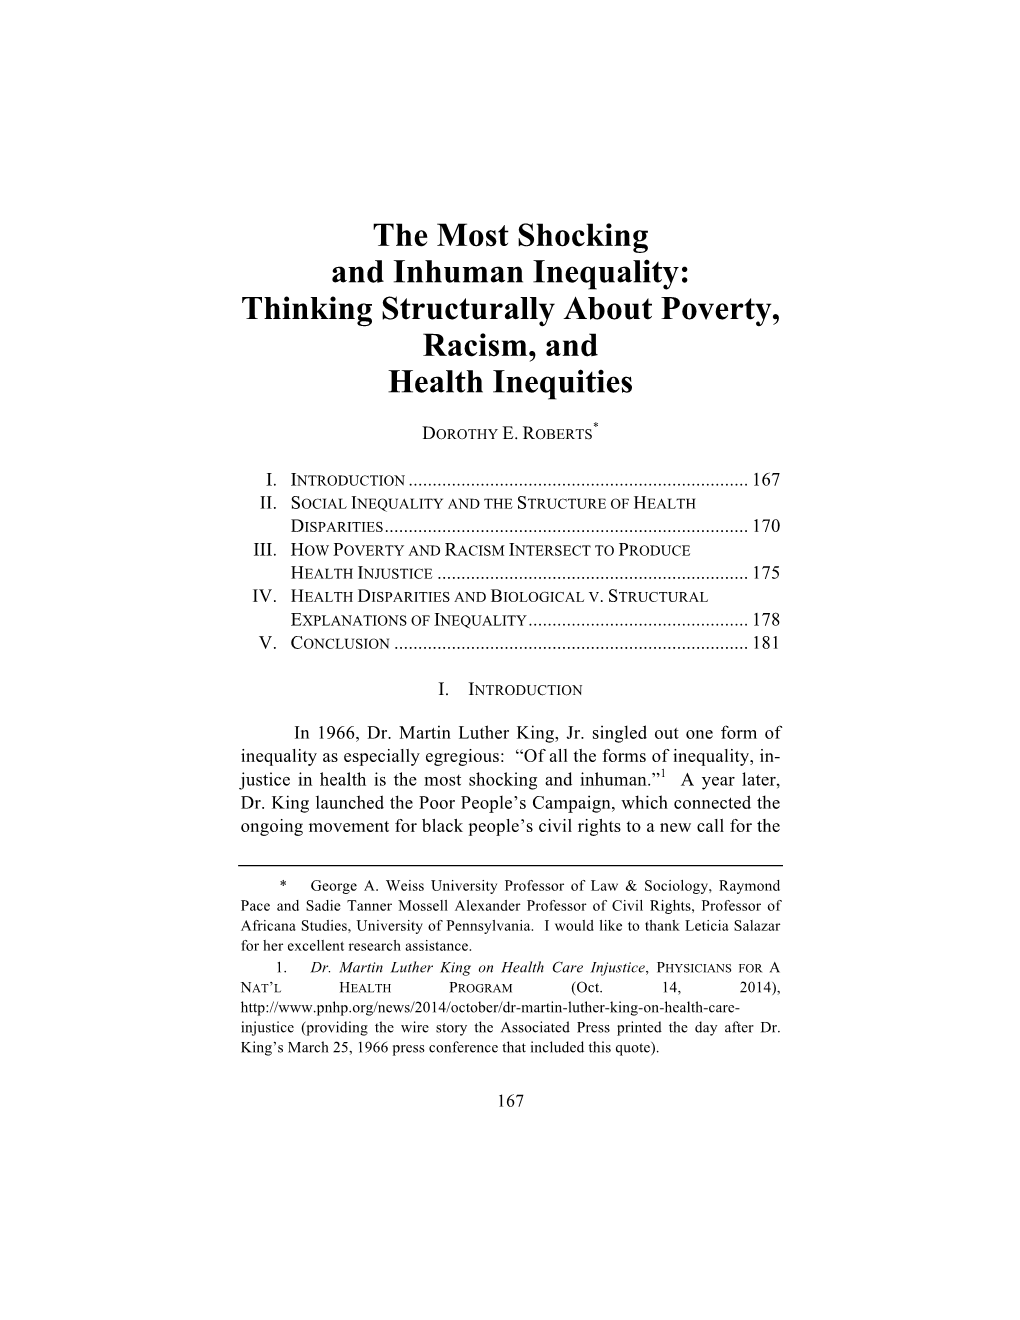 Thinking Structurally About Poverty, Racism, and Health Inequities